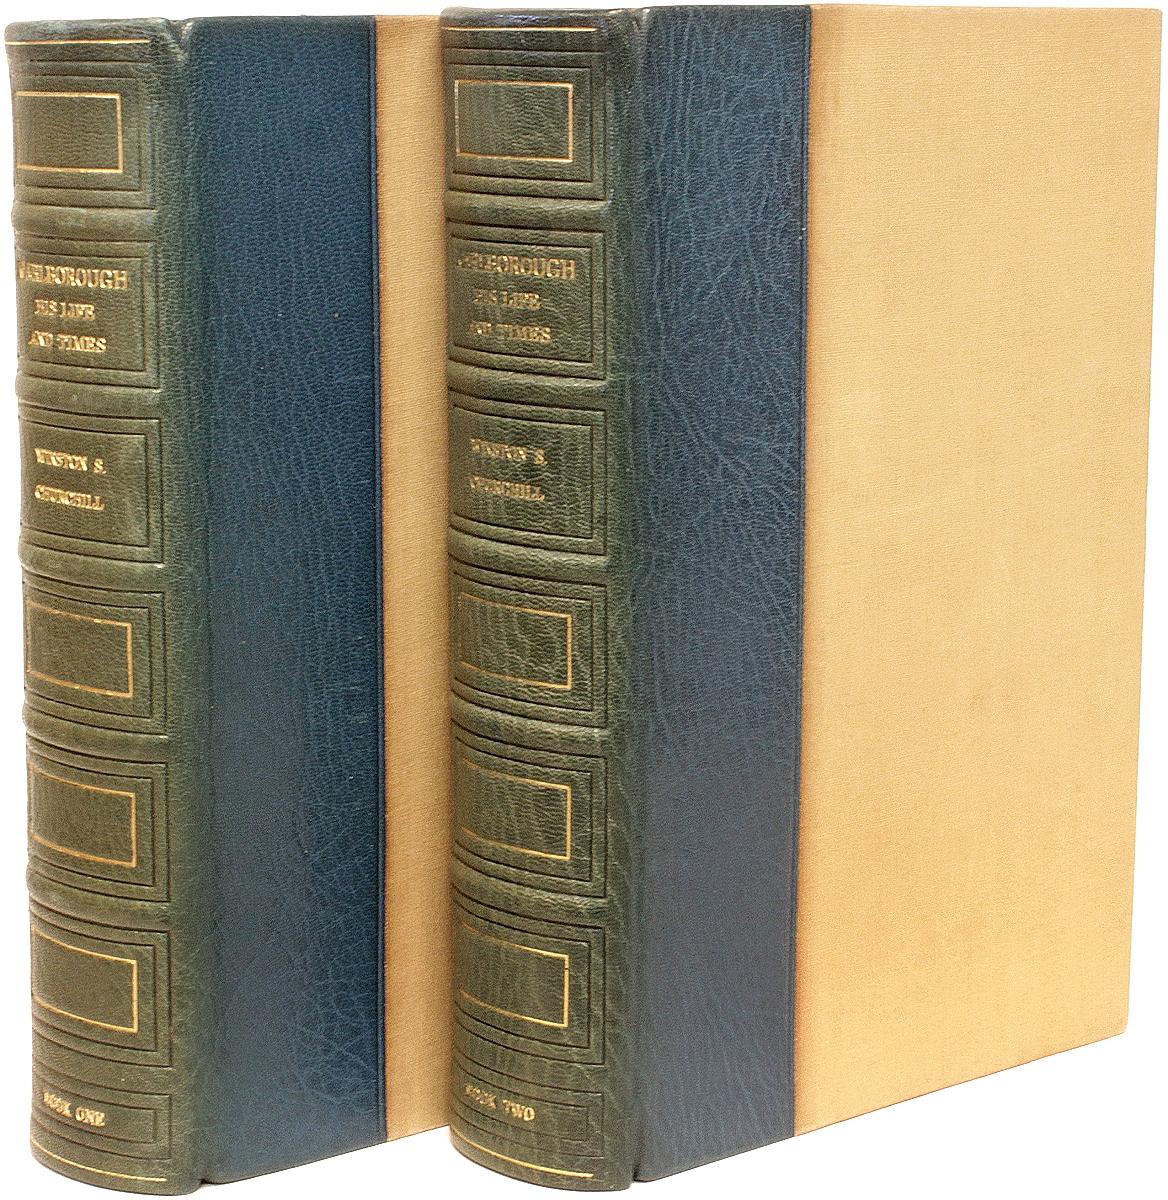 Author: Churchill, Winston S. 

Title: Marlborough His Life And Times.

Publisher: London: George G. Harrap & Co. Ltd., 1947.

Description: First Two Volume Edition In The Deluxe Binding. 2 vols., illustrated, foldout plates, bound in the